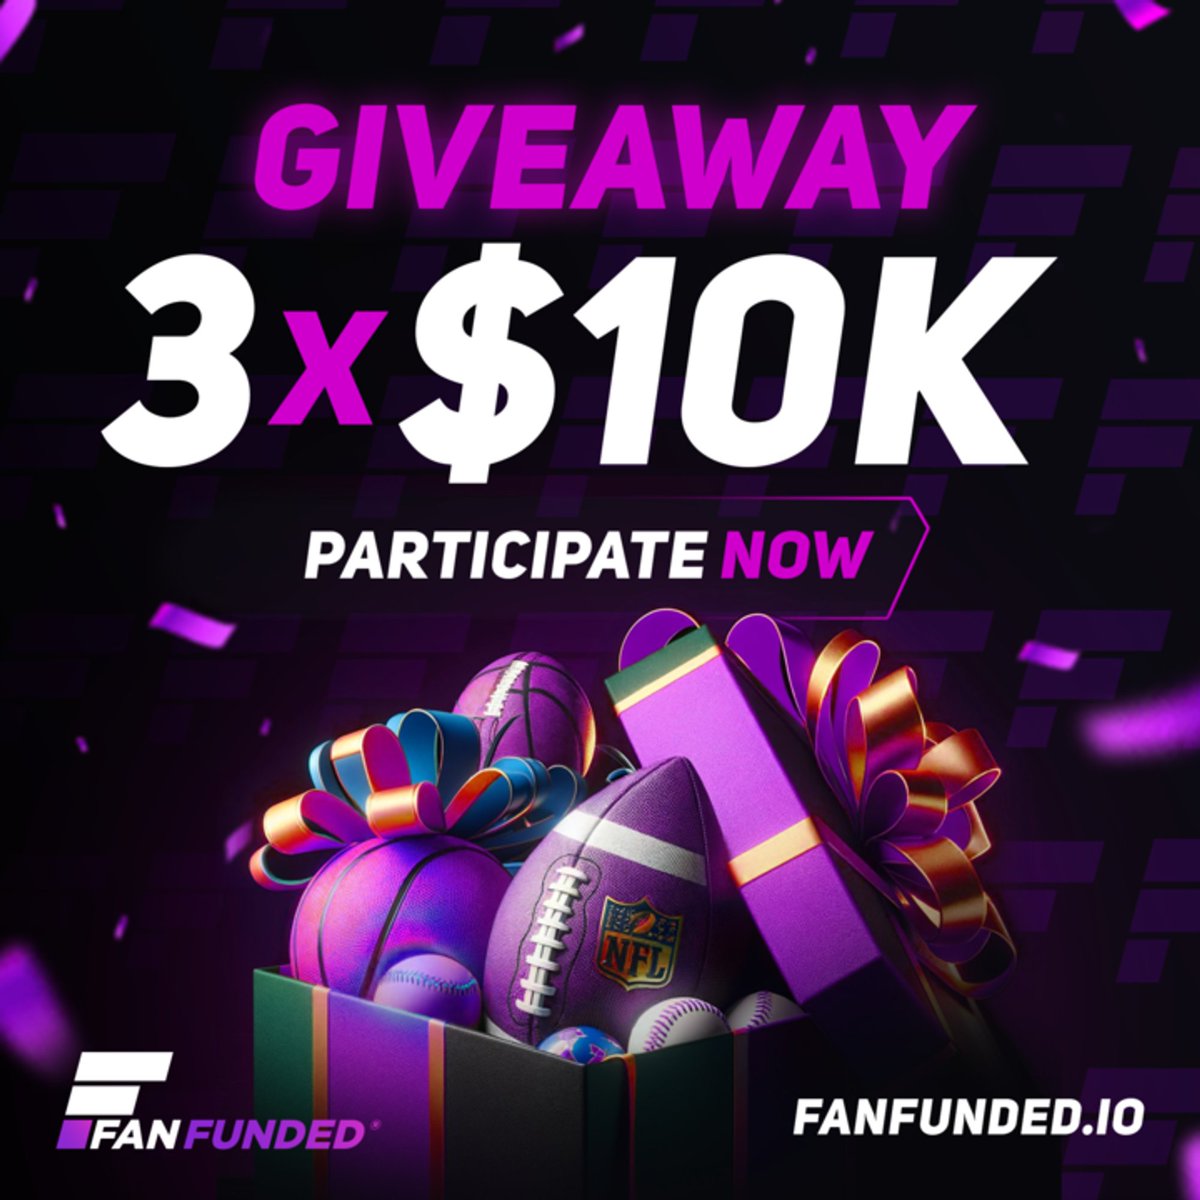 $30,000 Sports Pick Funding Giveaway is Live! 💜

Want to win one of 3 x $10k Blitz Fan Funded Accounts? Here’s how to participate:

1. Follow @fanfundedclub
2. Like and repost
3. Tag 3 sports pickers

We'll pick combined winners from X and Discord in 1 week! 🔥